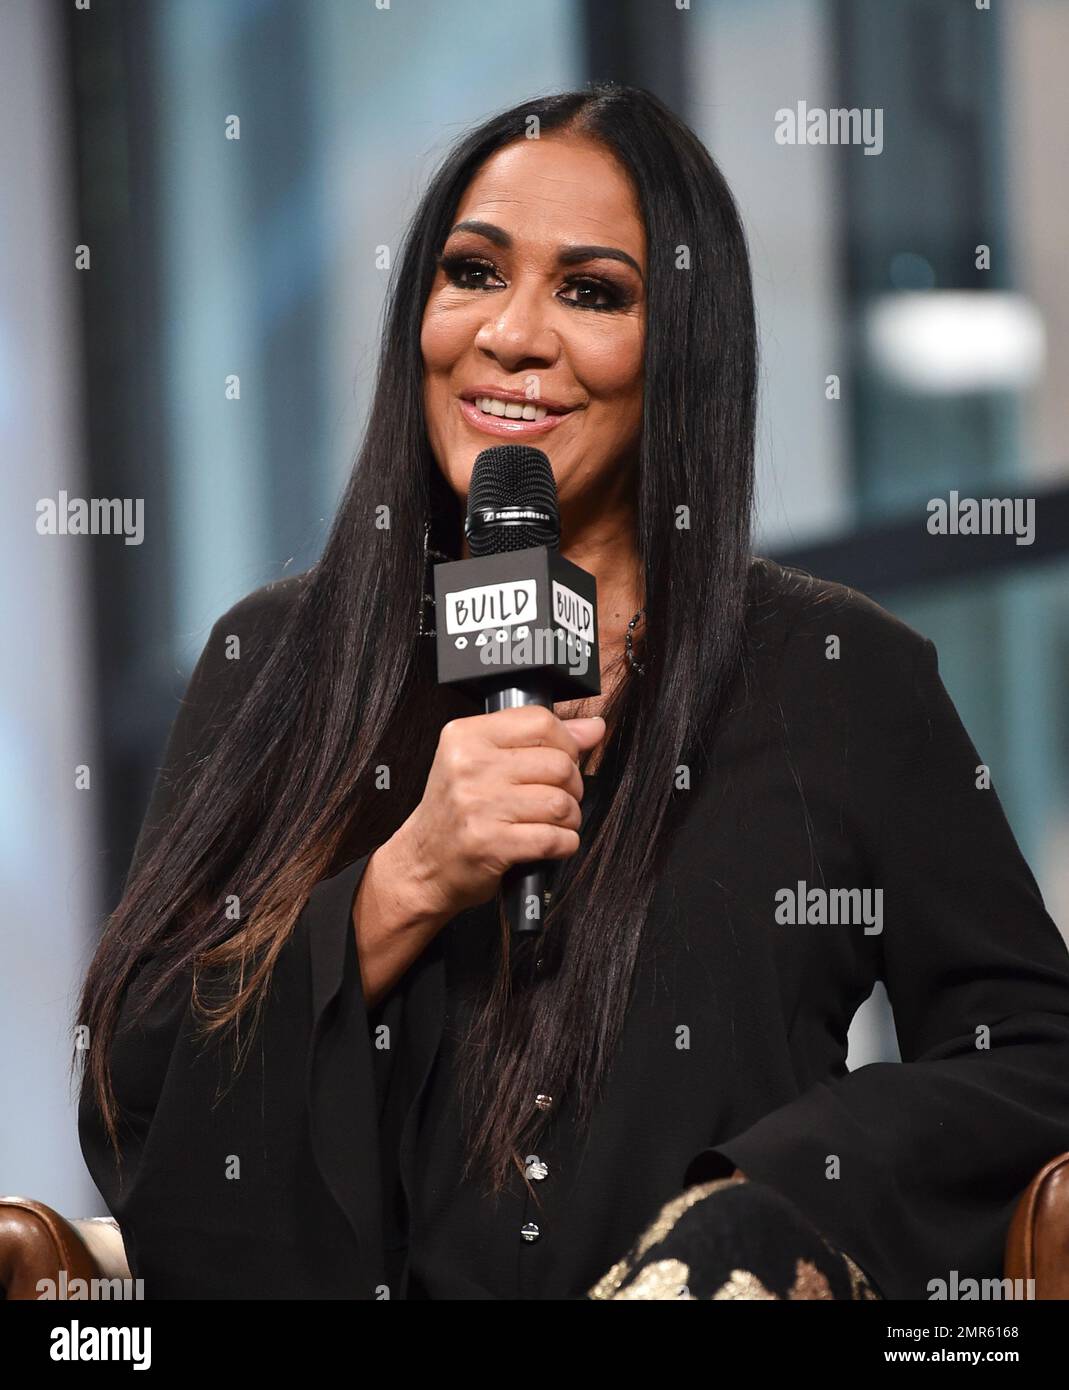 Musician Sheila E. participates in the BUILD Speaker Series to discuss her  new album, "Iconic: Message 4 America", at AOL Studios on Monday, Oct. 23,  2017, in New York. (Photo by Evan